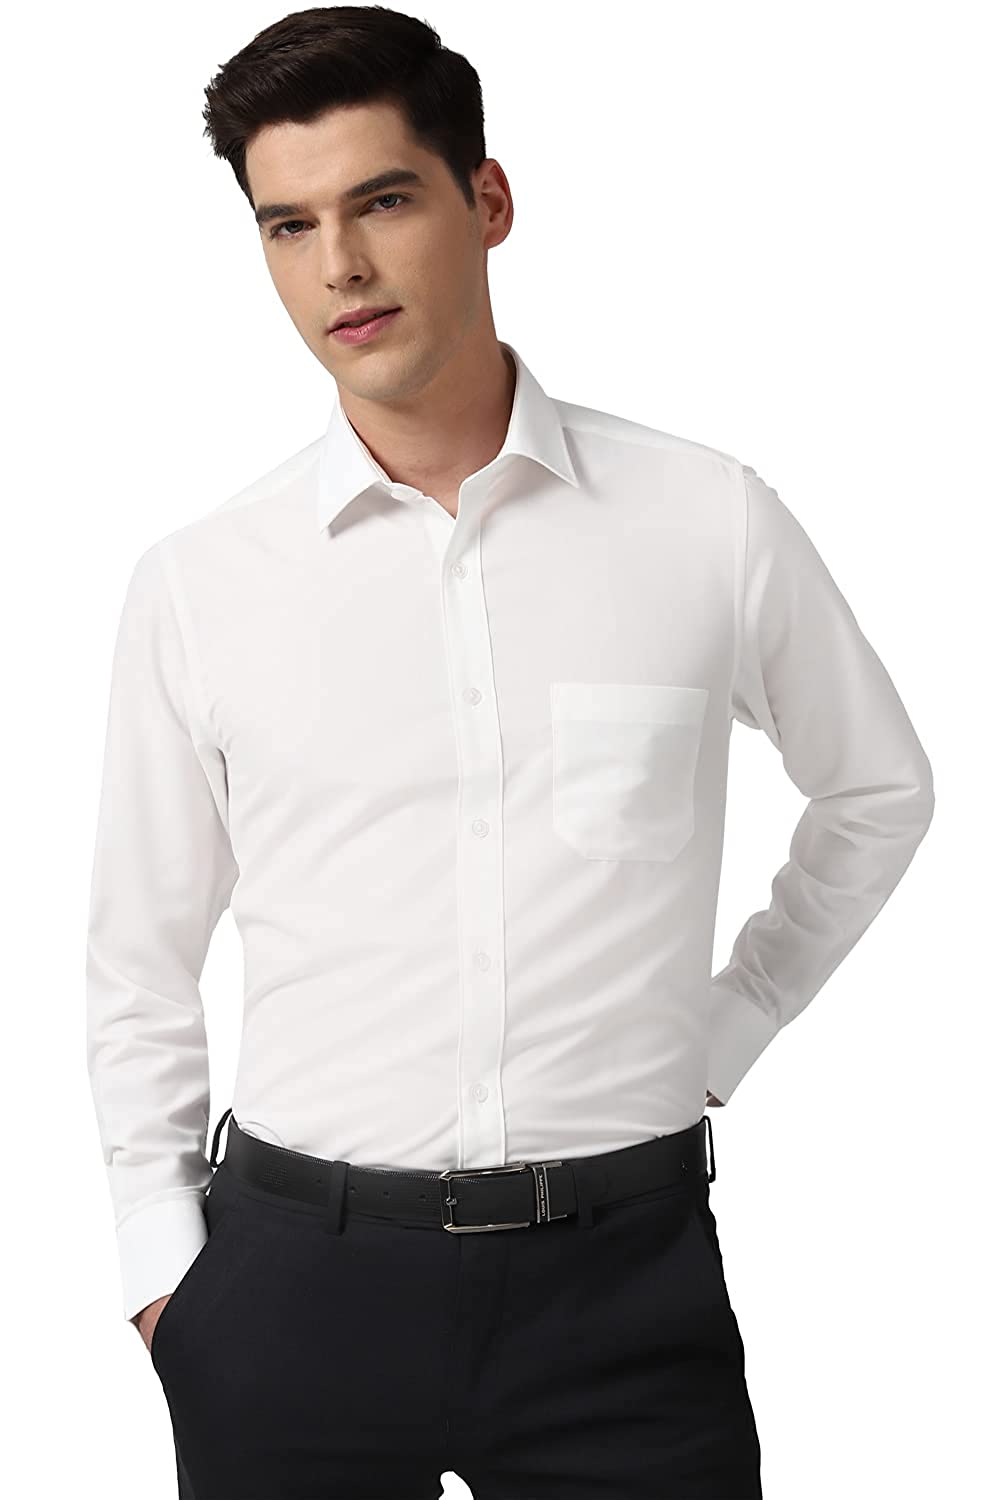 Top 10 Best White Shirt Brands For Men In India 2023